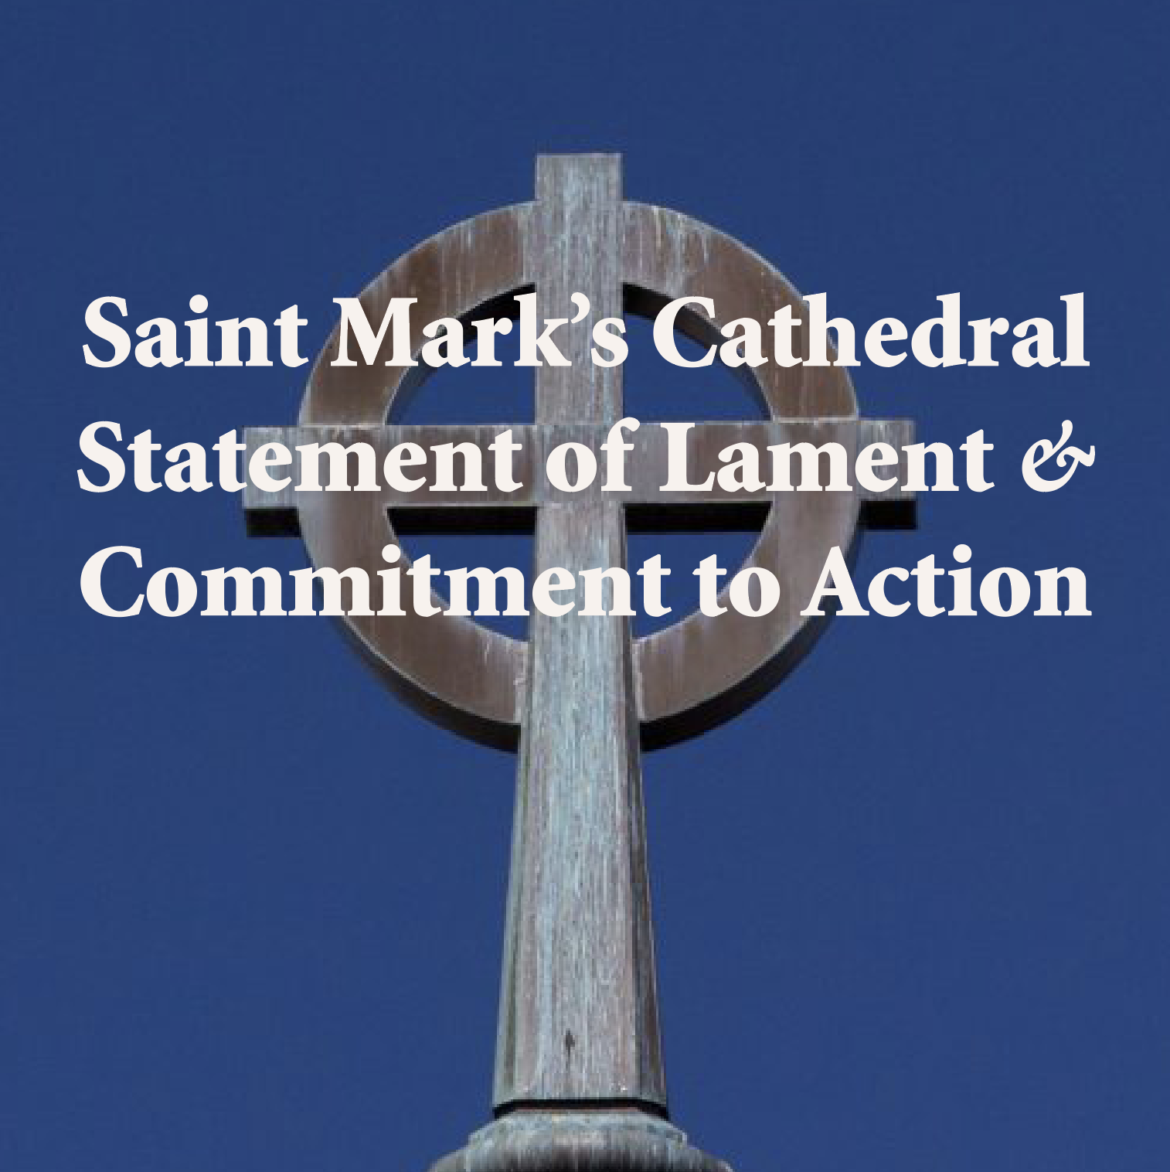 An Introduction to Saint Mark’s Statement of Lament and Commitment to Action